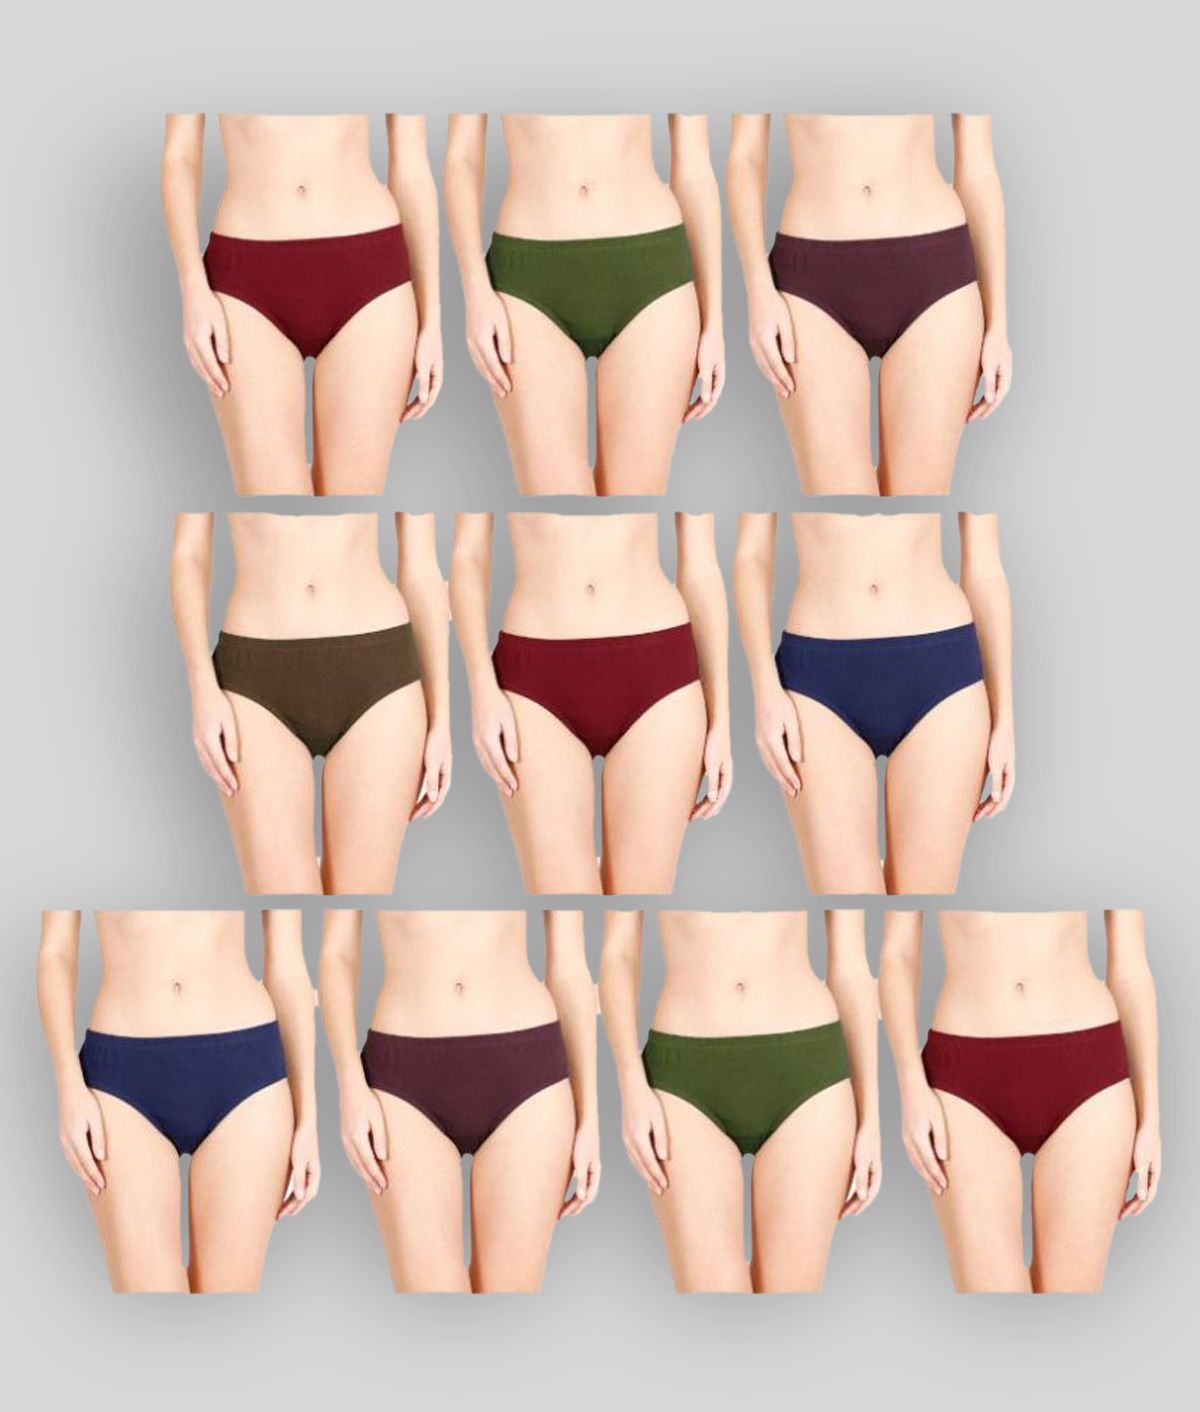     			Rupa - Multicolor Cotton Solid Women's Briefs ( Pack of 10 )